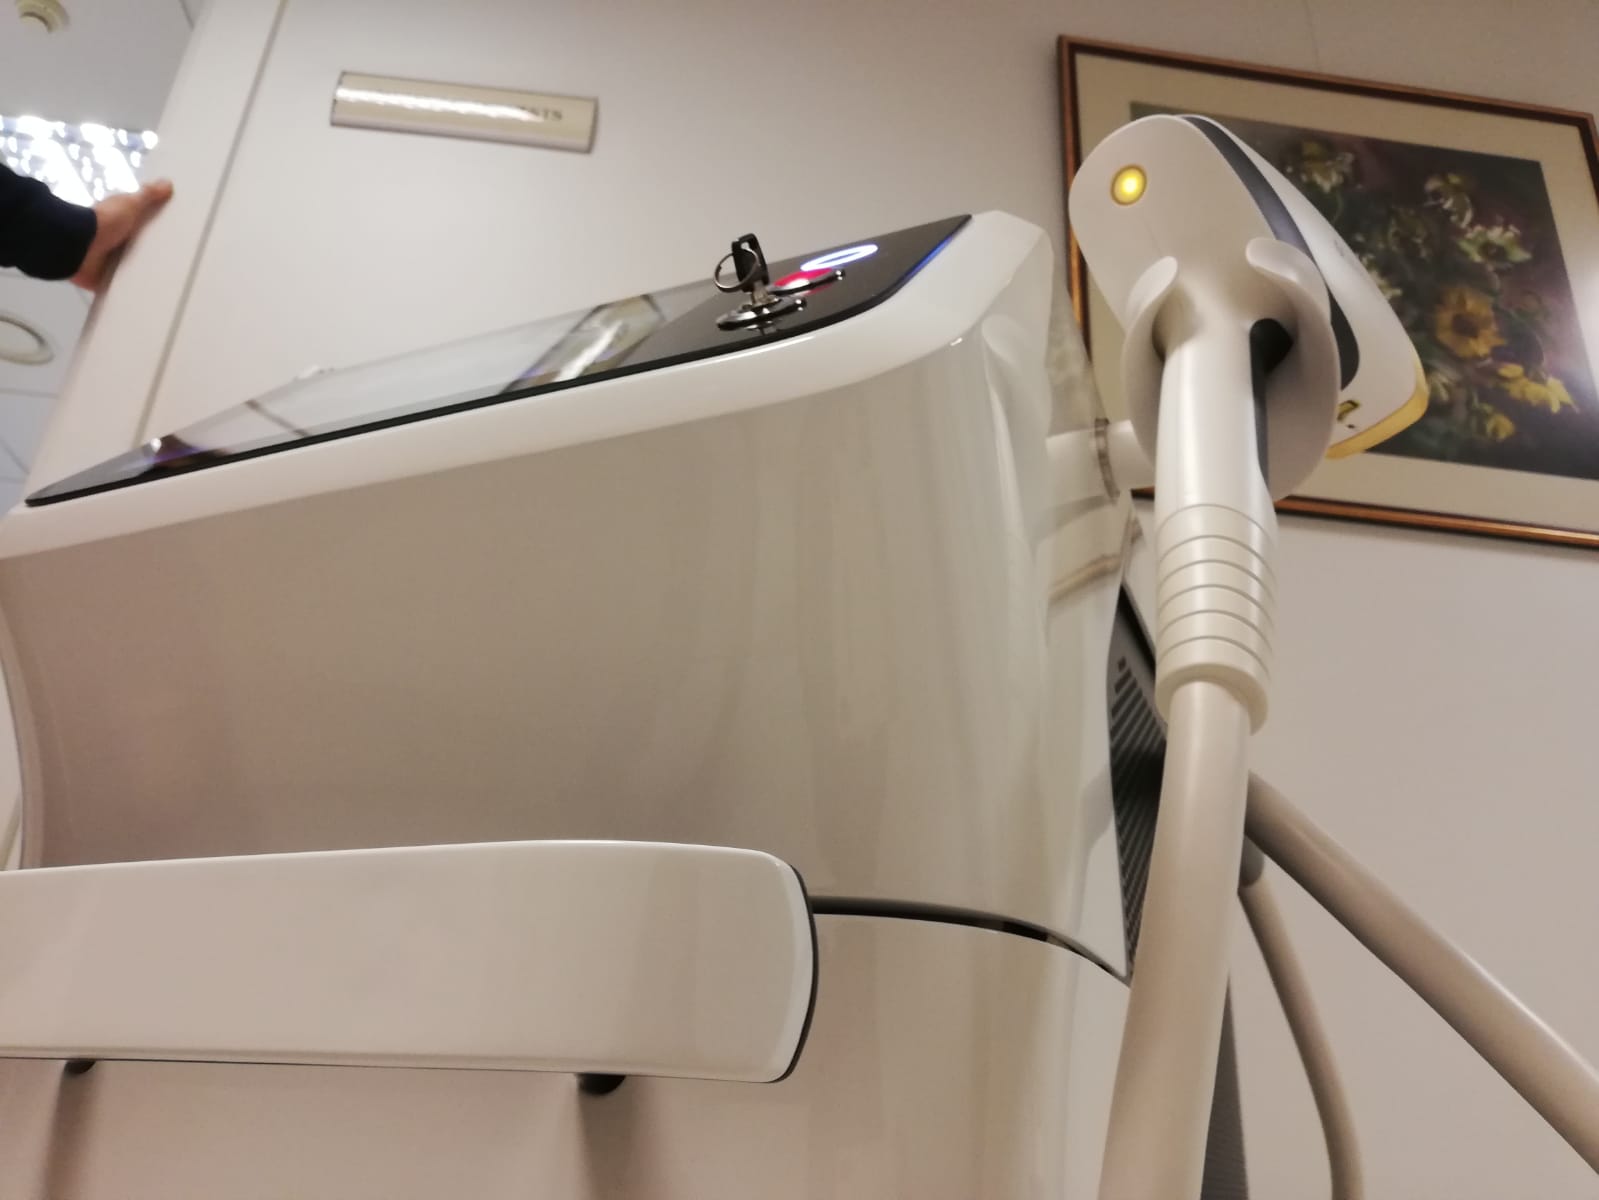 Diode laser for hair removal - effective and with no burns